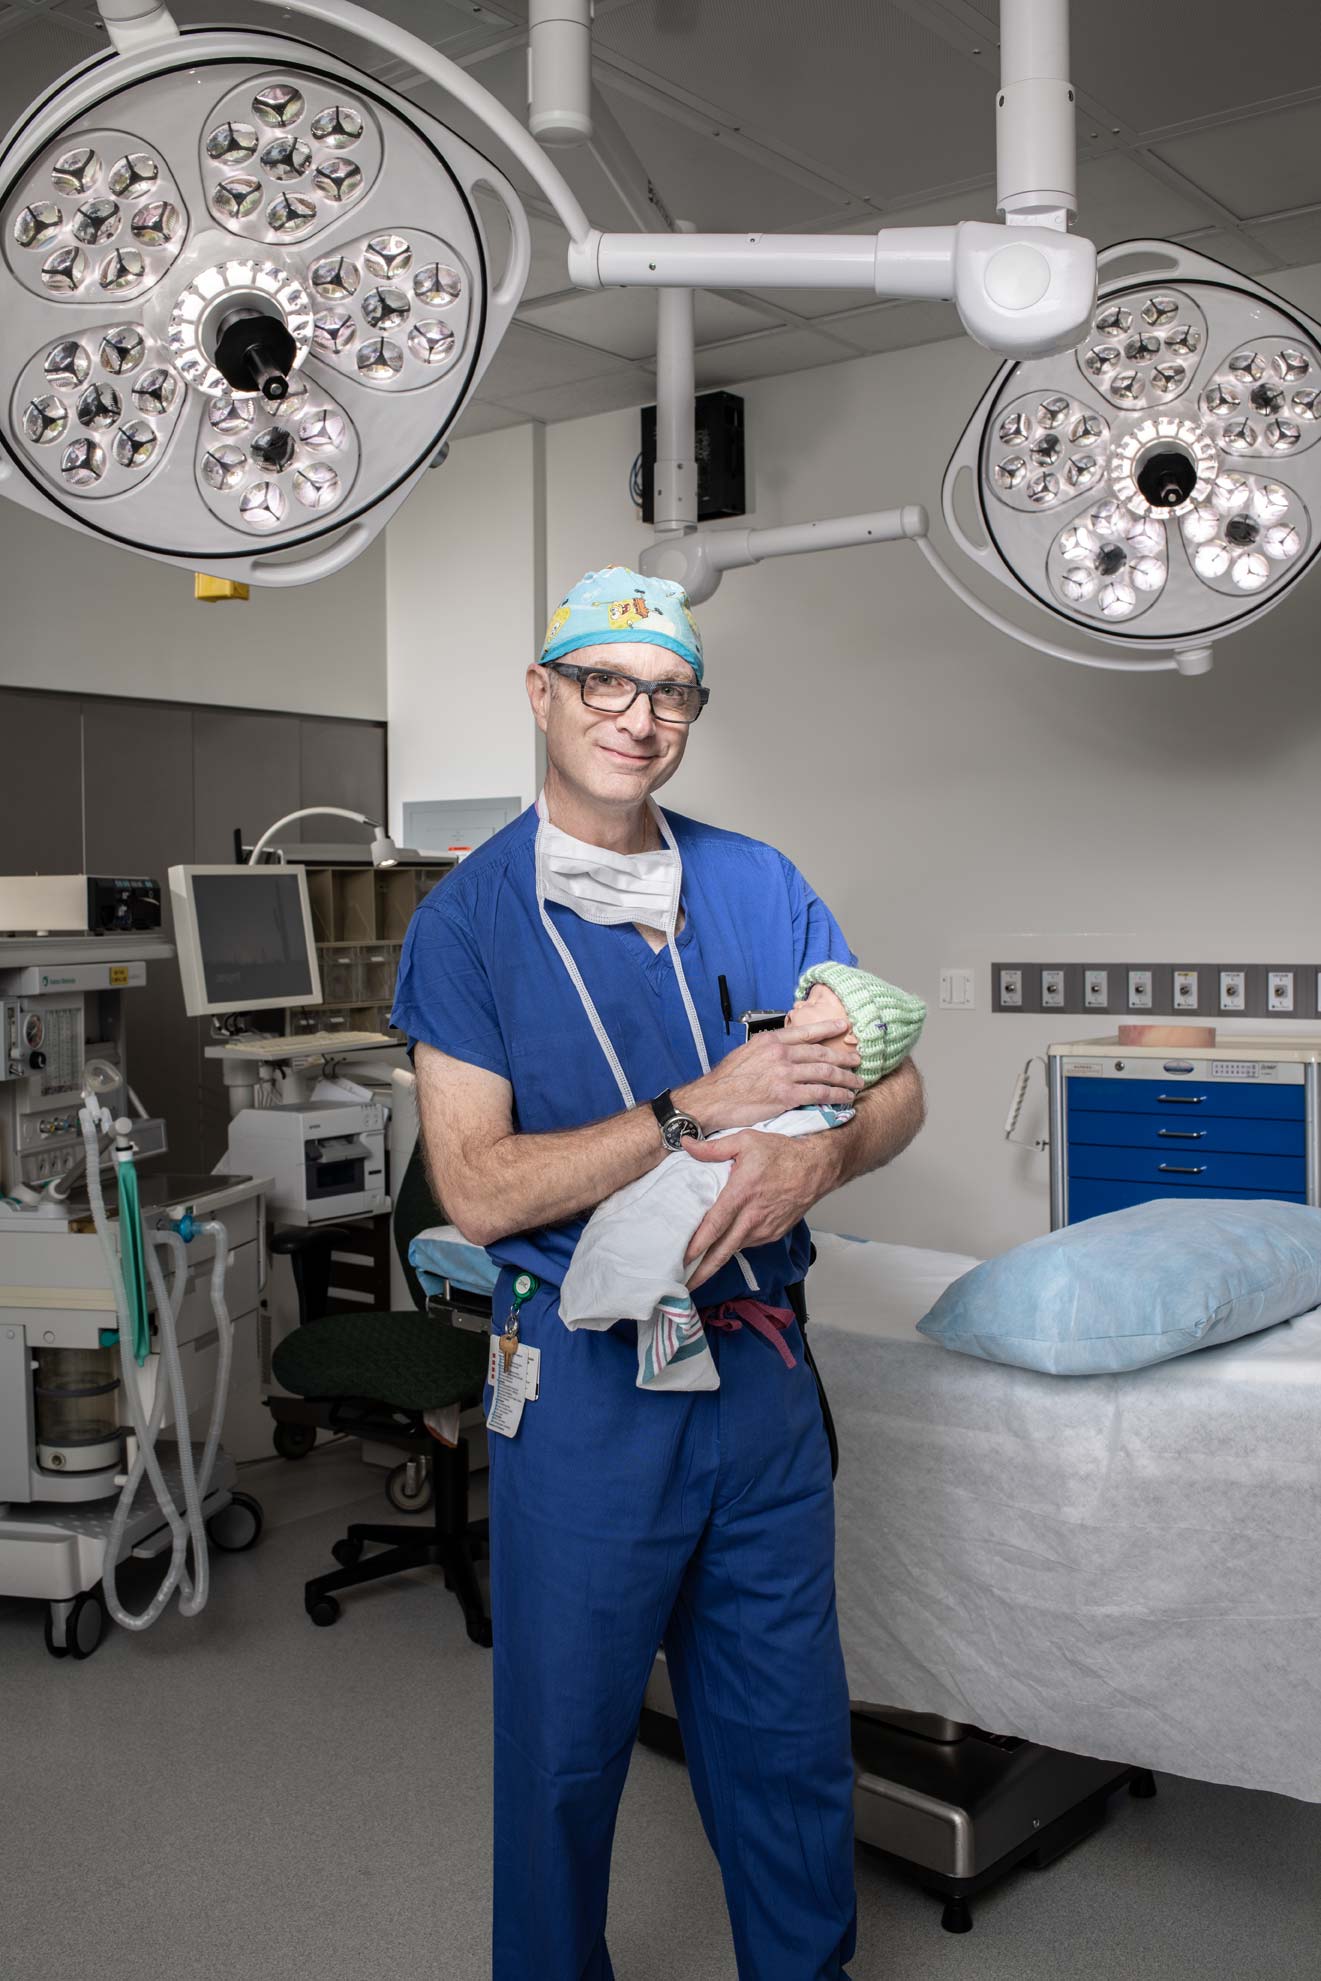 Pediatric anesthesiologist Dr. Jose Dominguez holds a baby in an operating room